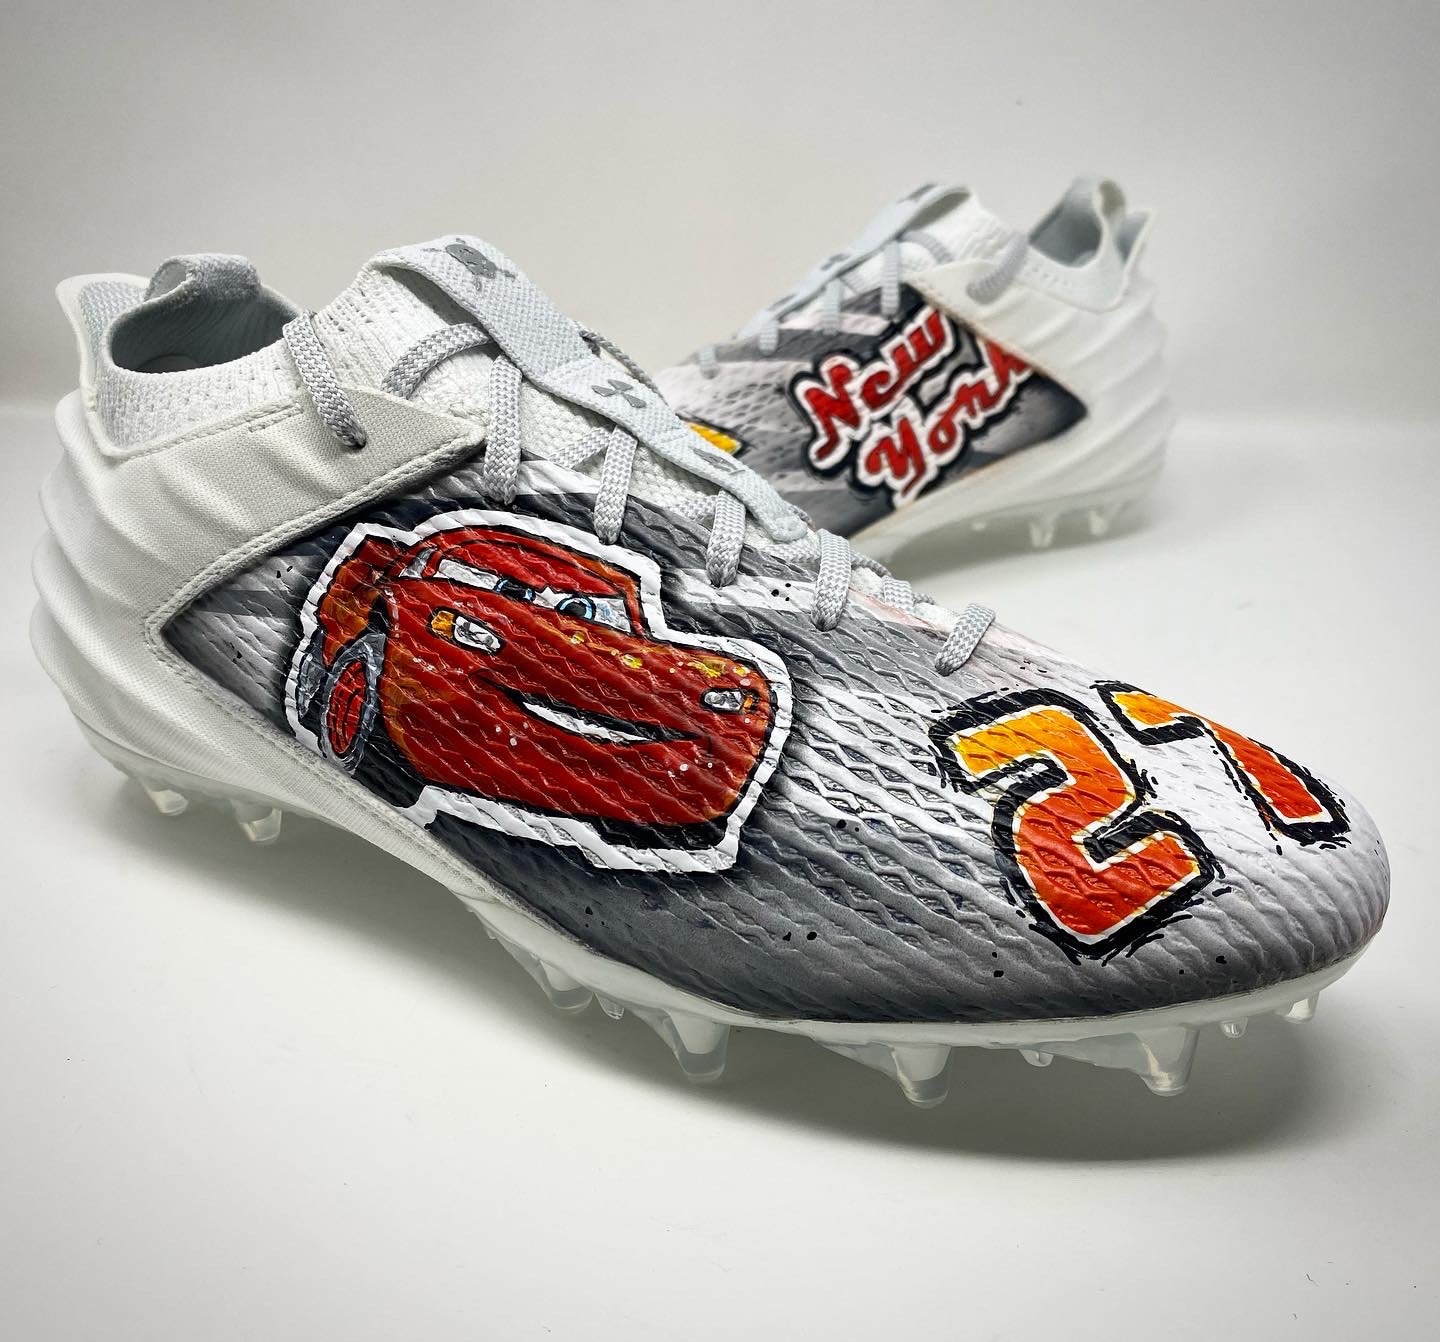 Spider man color way custom cleats #fyp #customshoes #football